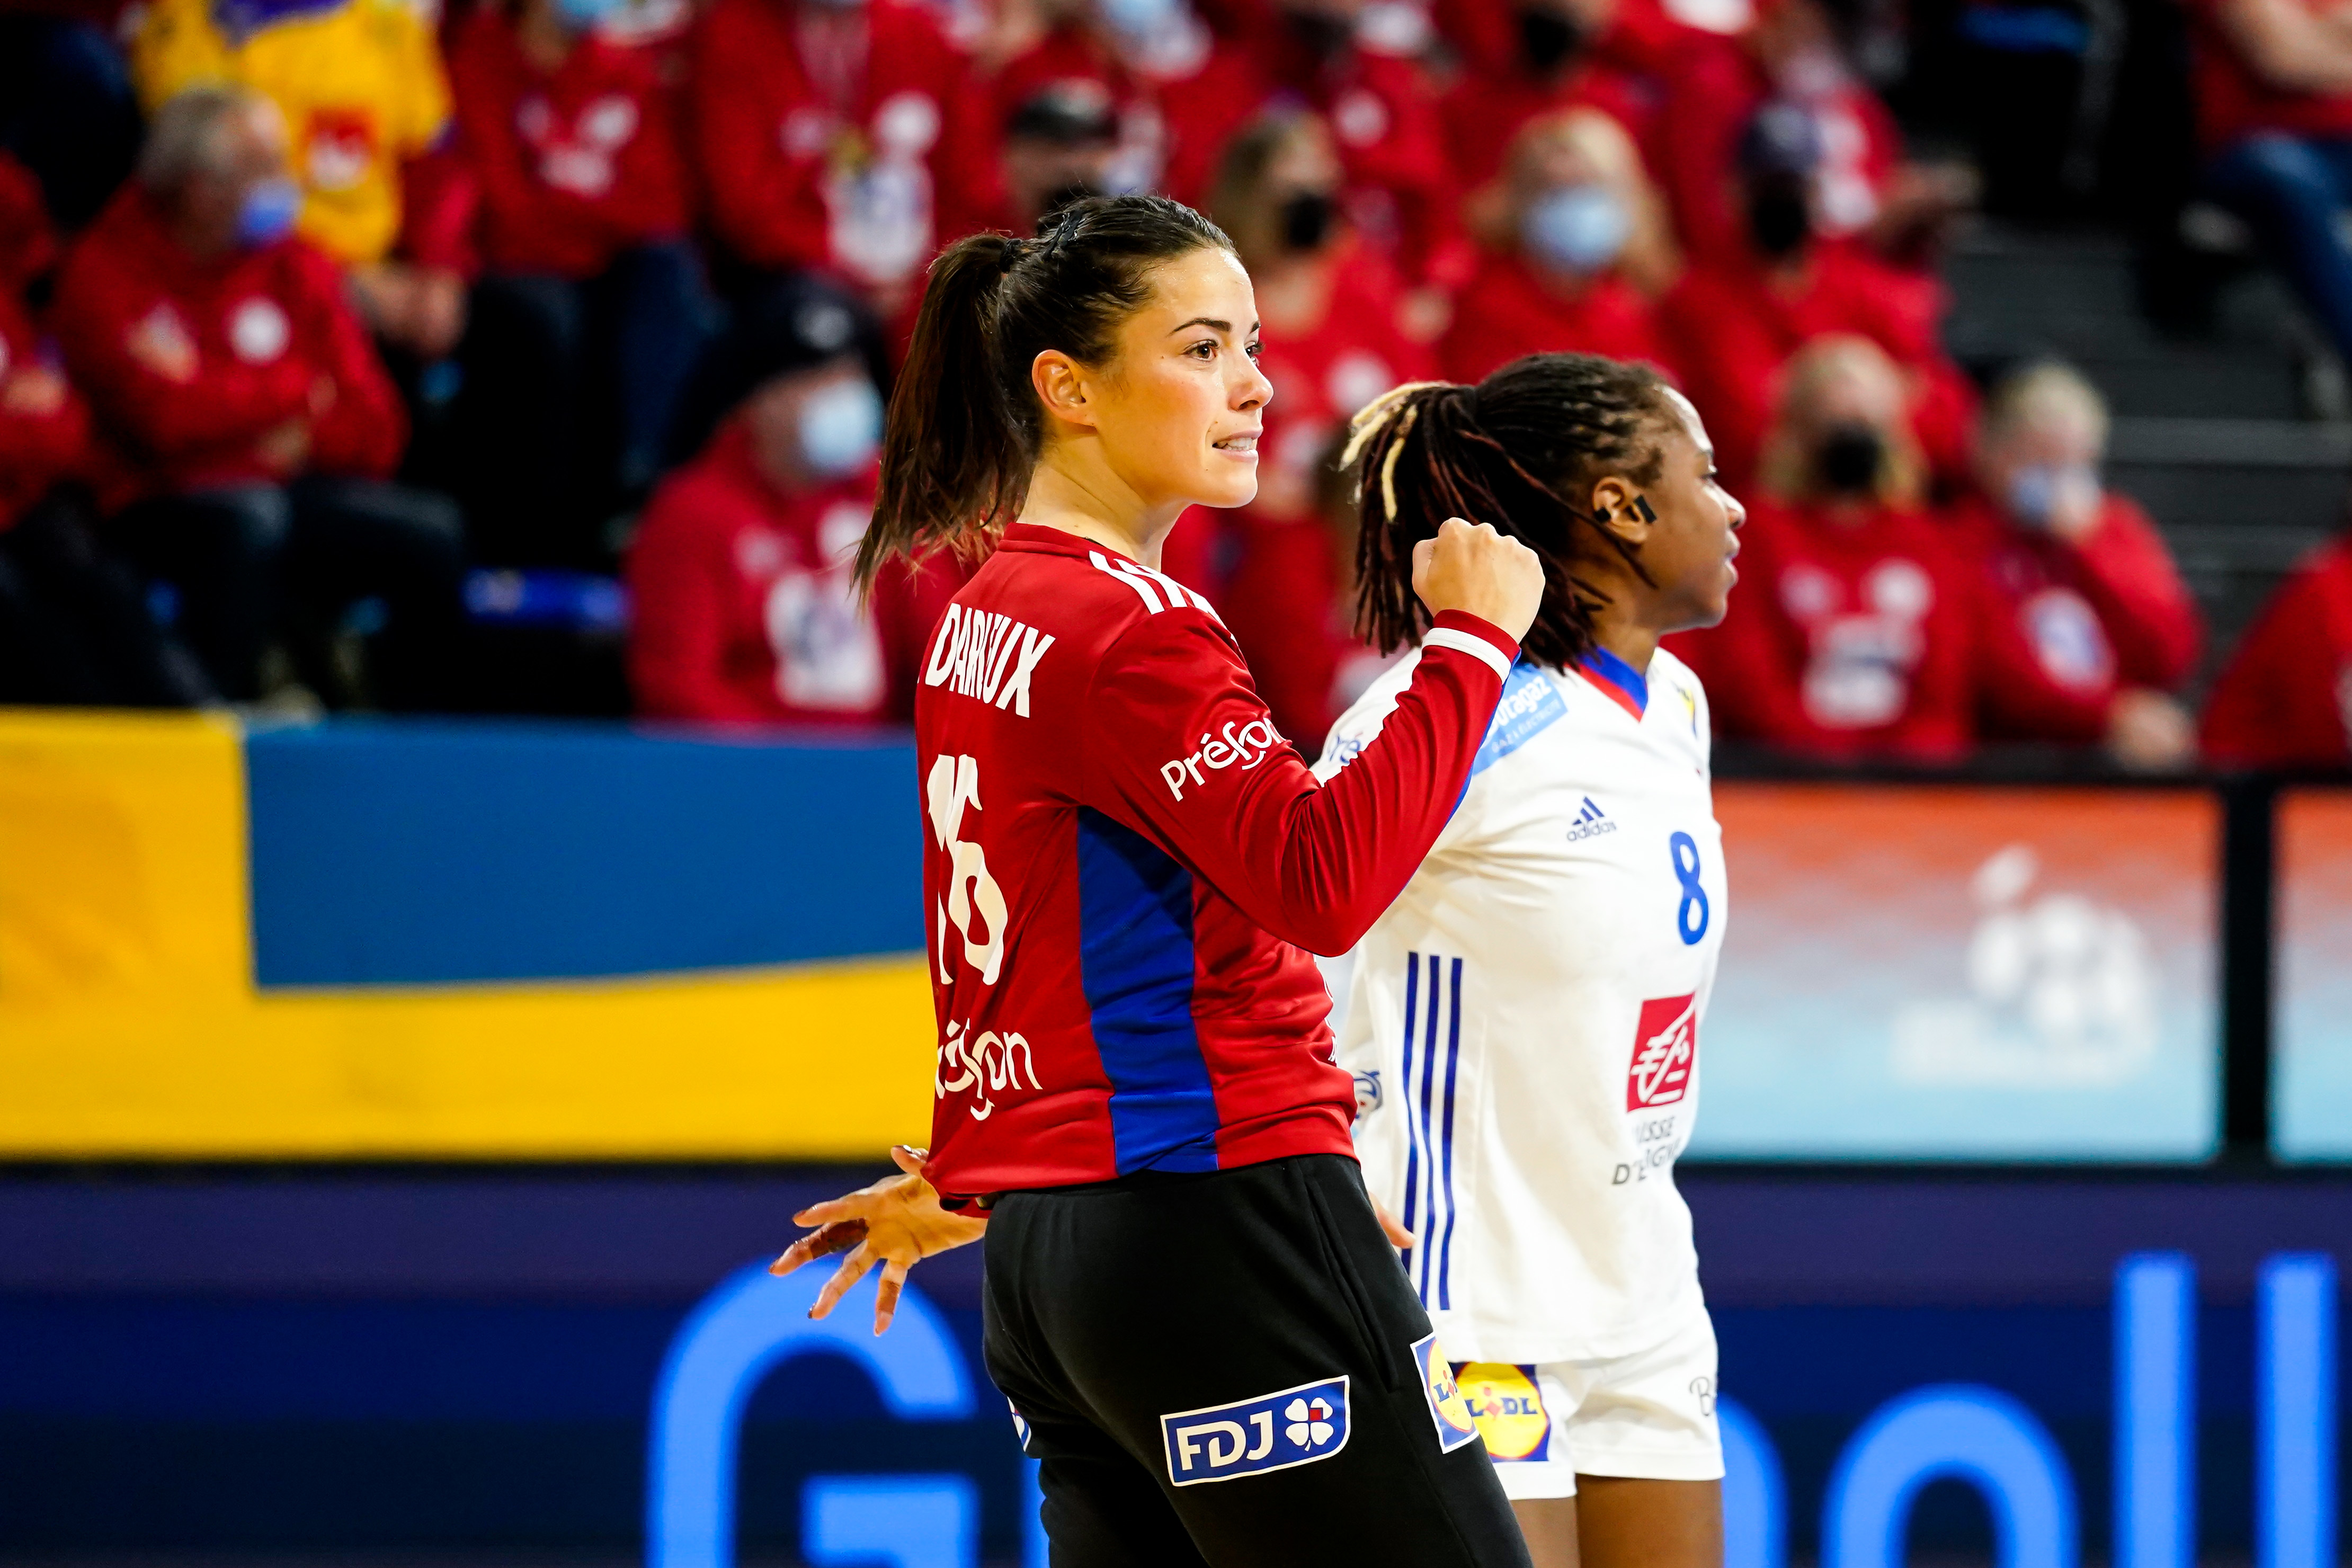 Cleopatre DARLEUX of France and Coralie LASSOURCE of France celebrates during the IHF Women's World Championship match between Sweden and France at Palacio de Deportes de Granollers on December 15, 2021 in Granollers, Spain. (Photo by Hugo Pfeiffer/Icon Sport)